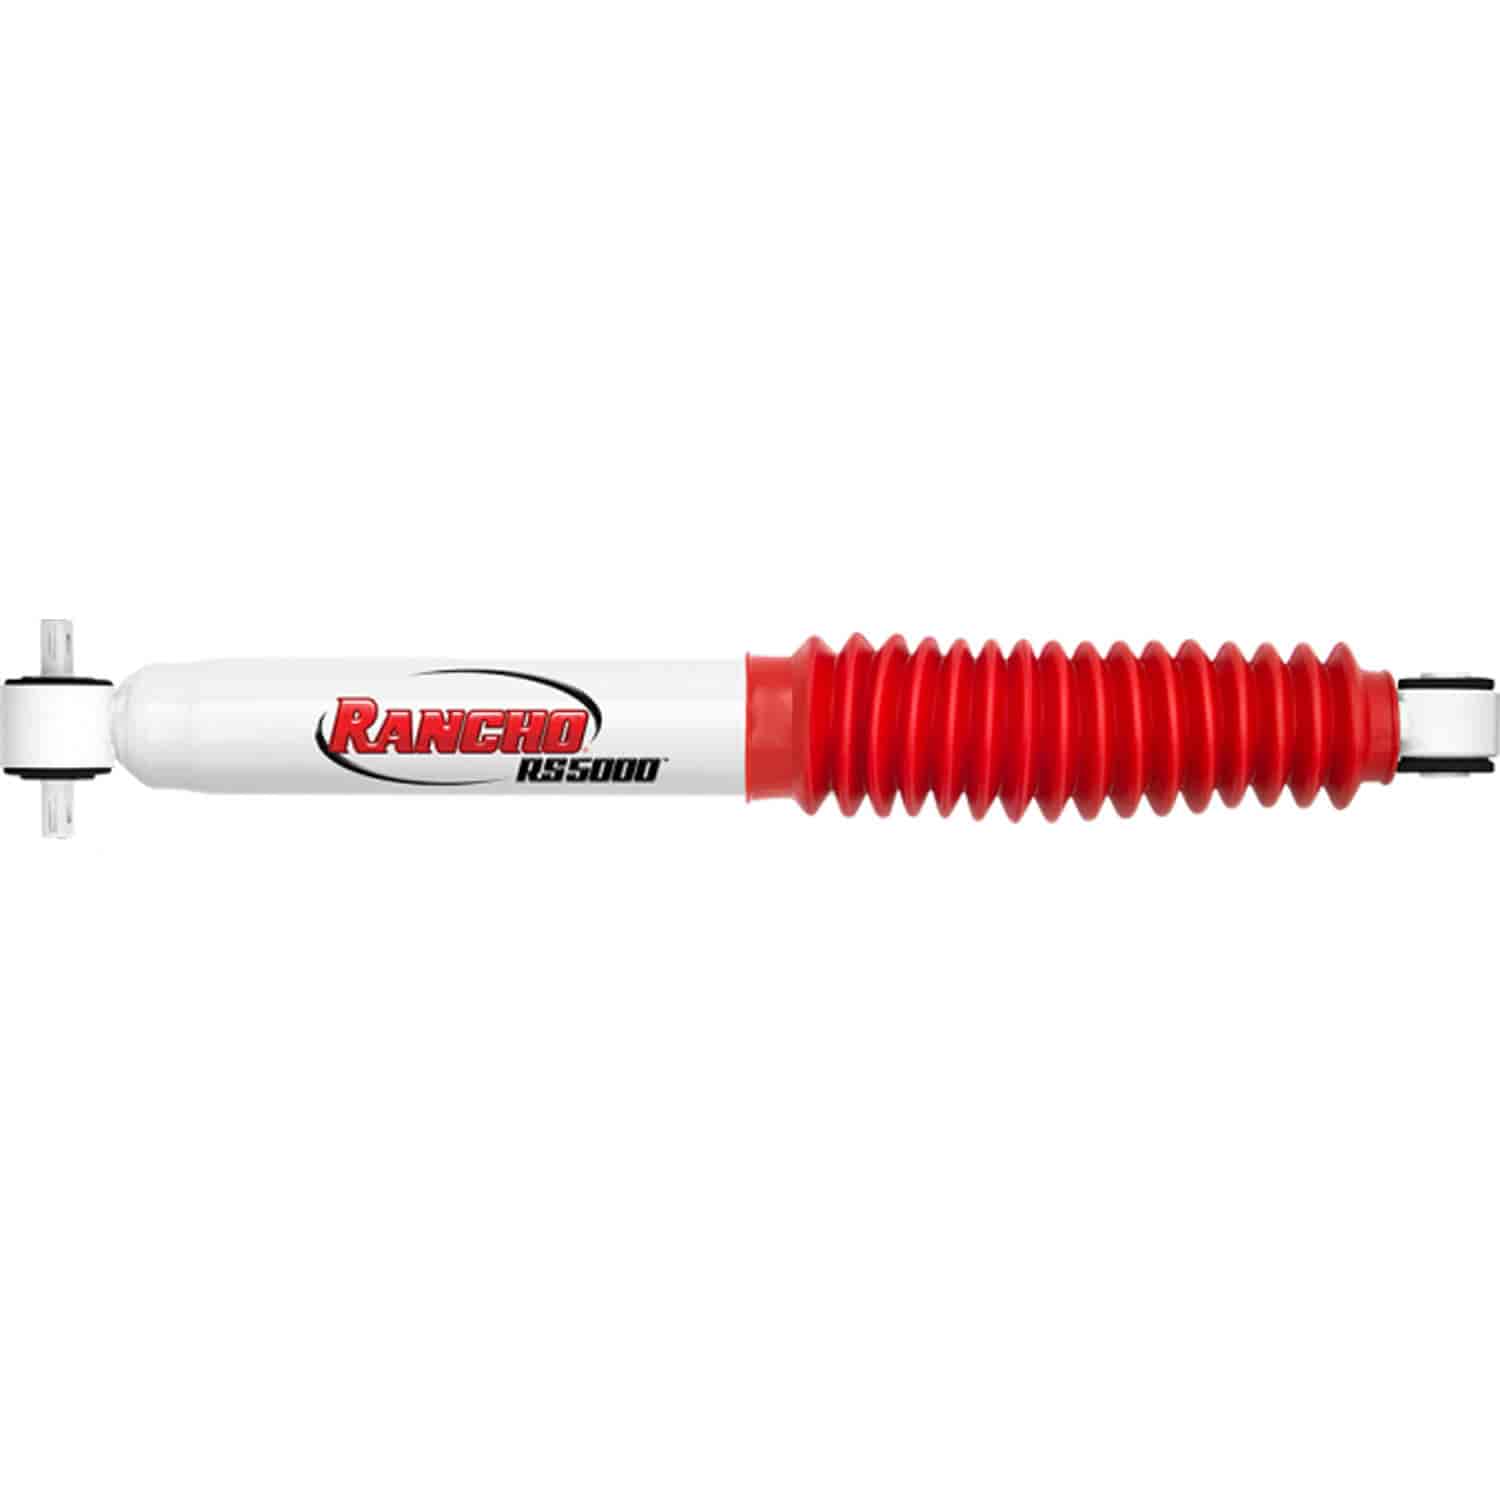 RS5000 Rear Shock Absorber Fits Ford Excursion